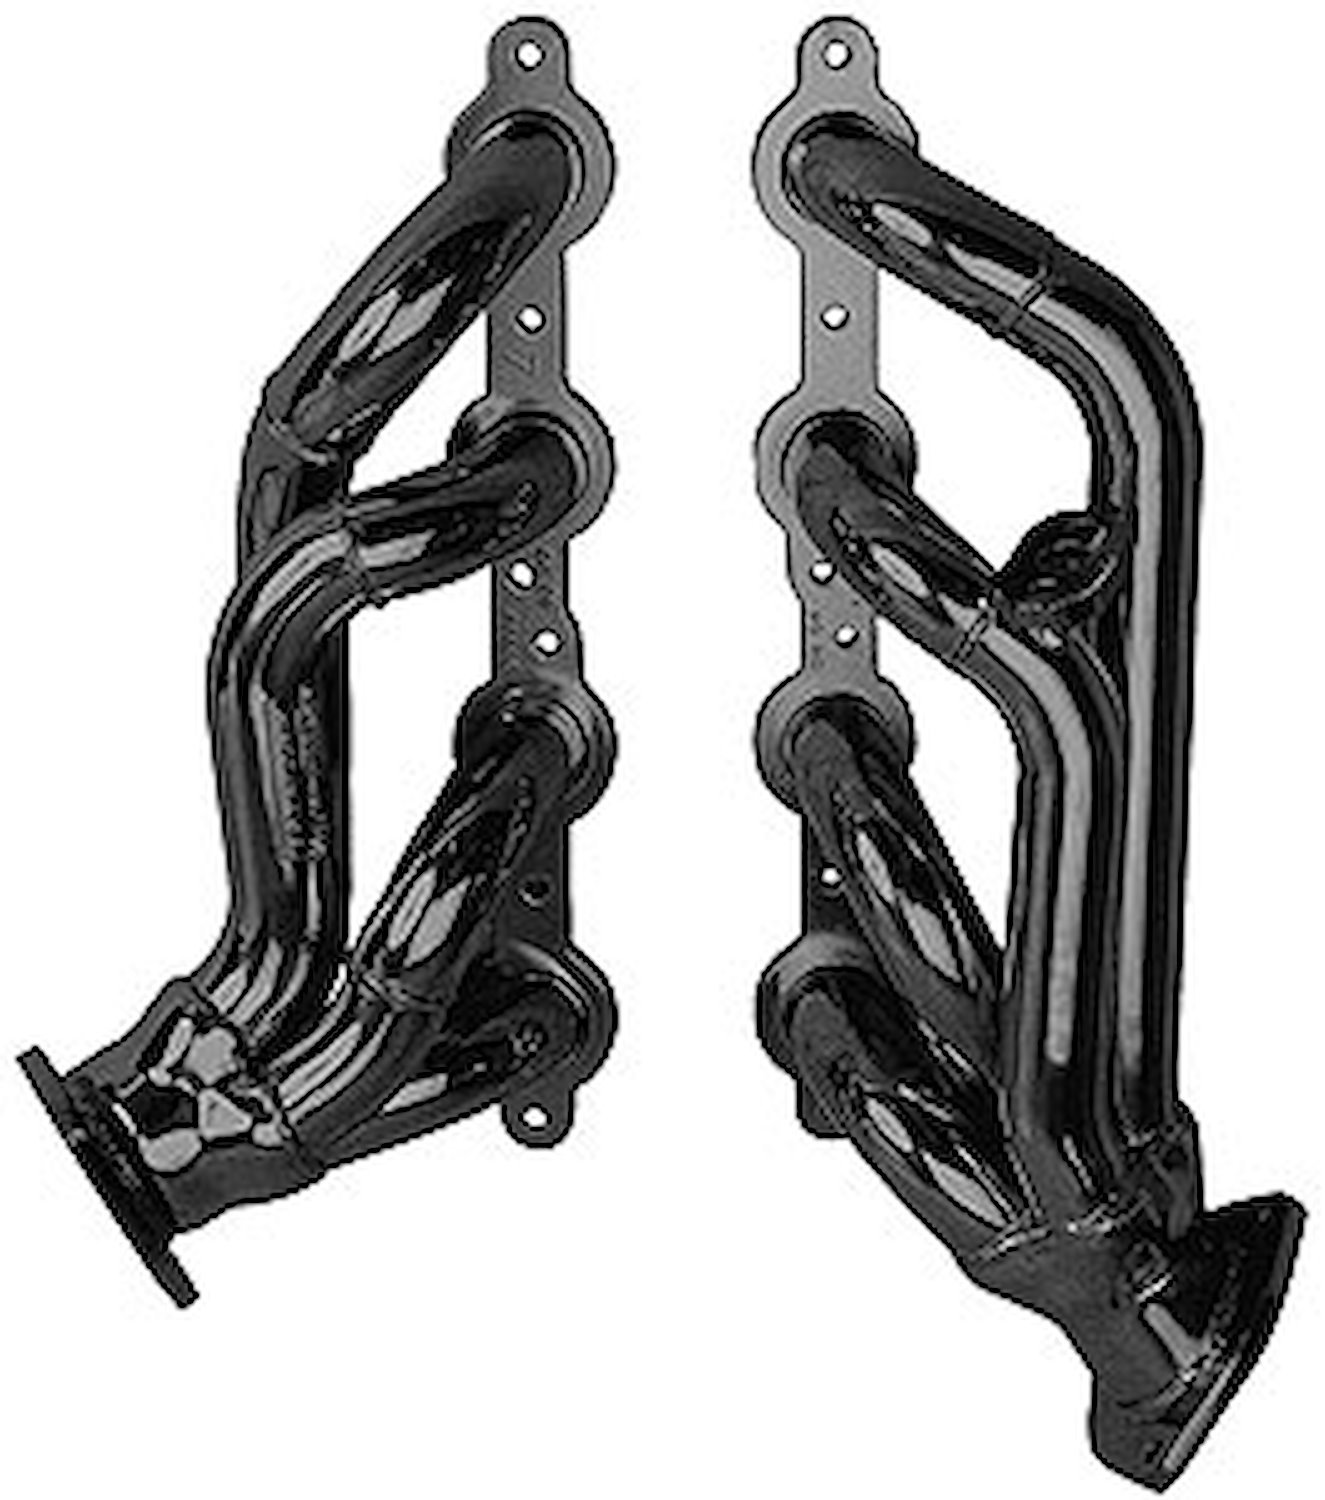 Standard Duty Uncoated Shorty Headers for 1999-2007 Hummer,